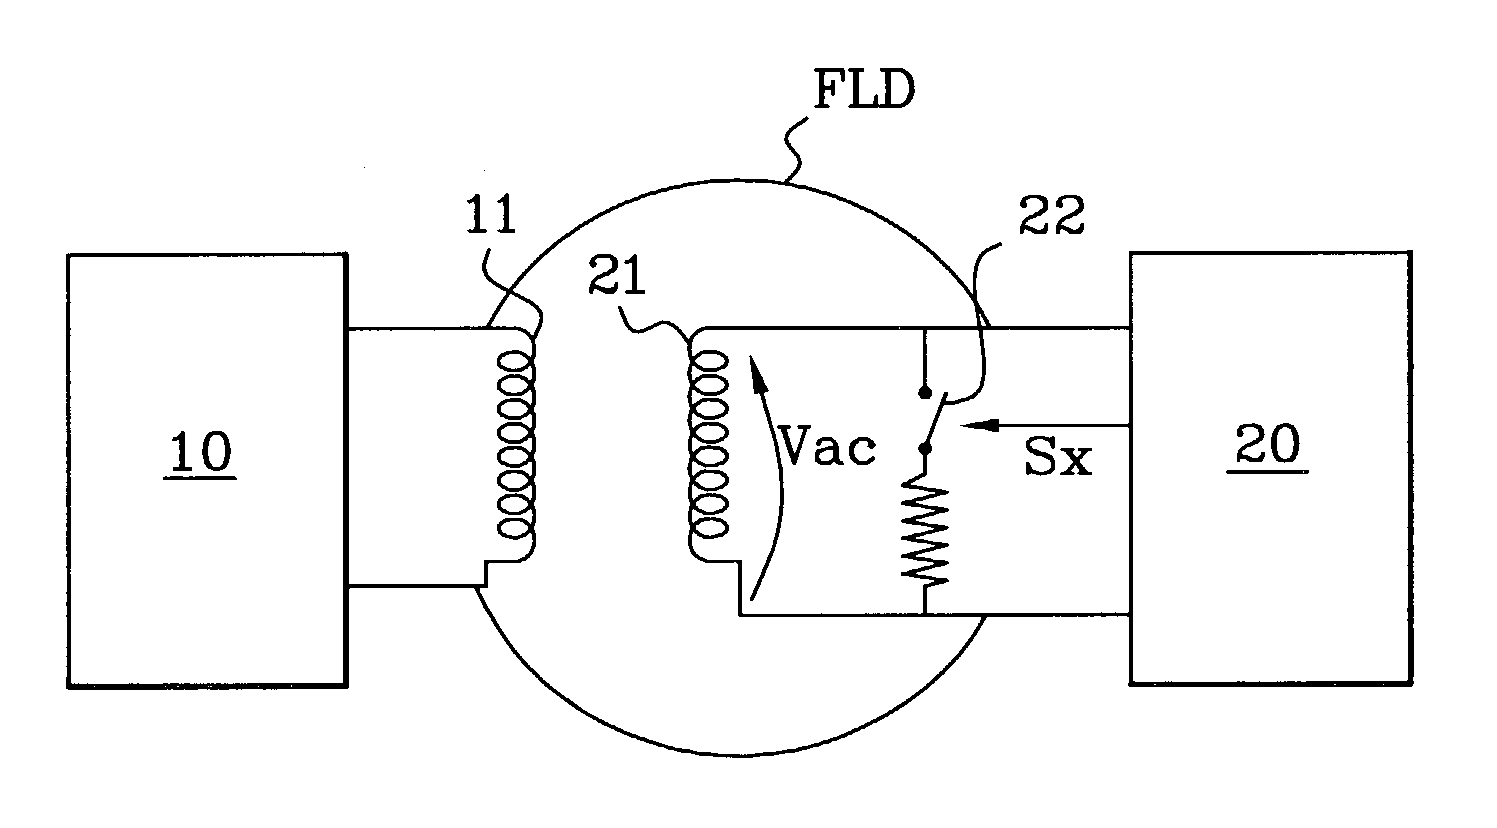 Contactless integrated circuit reader